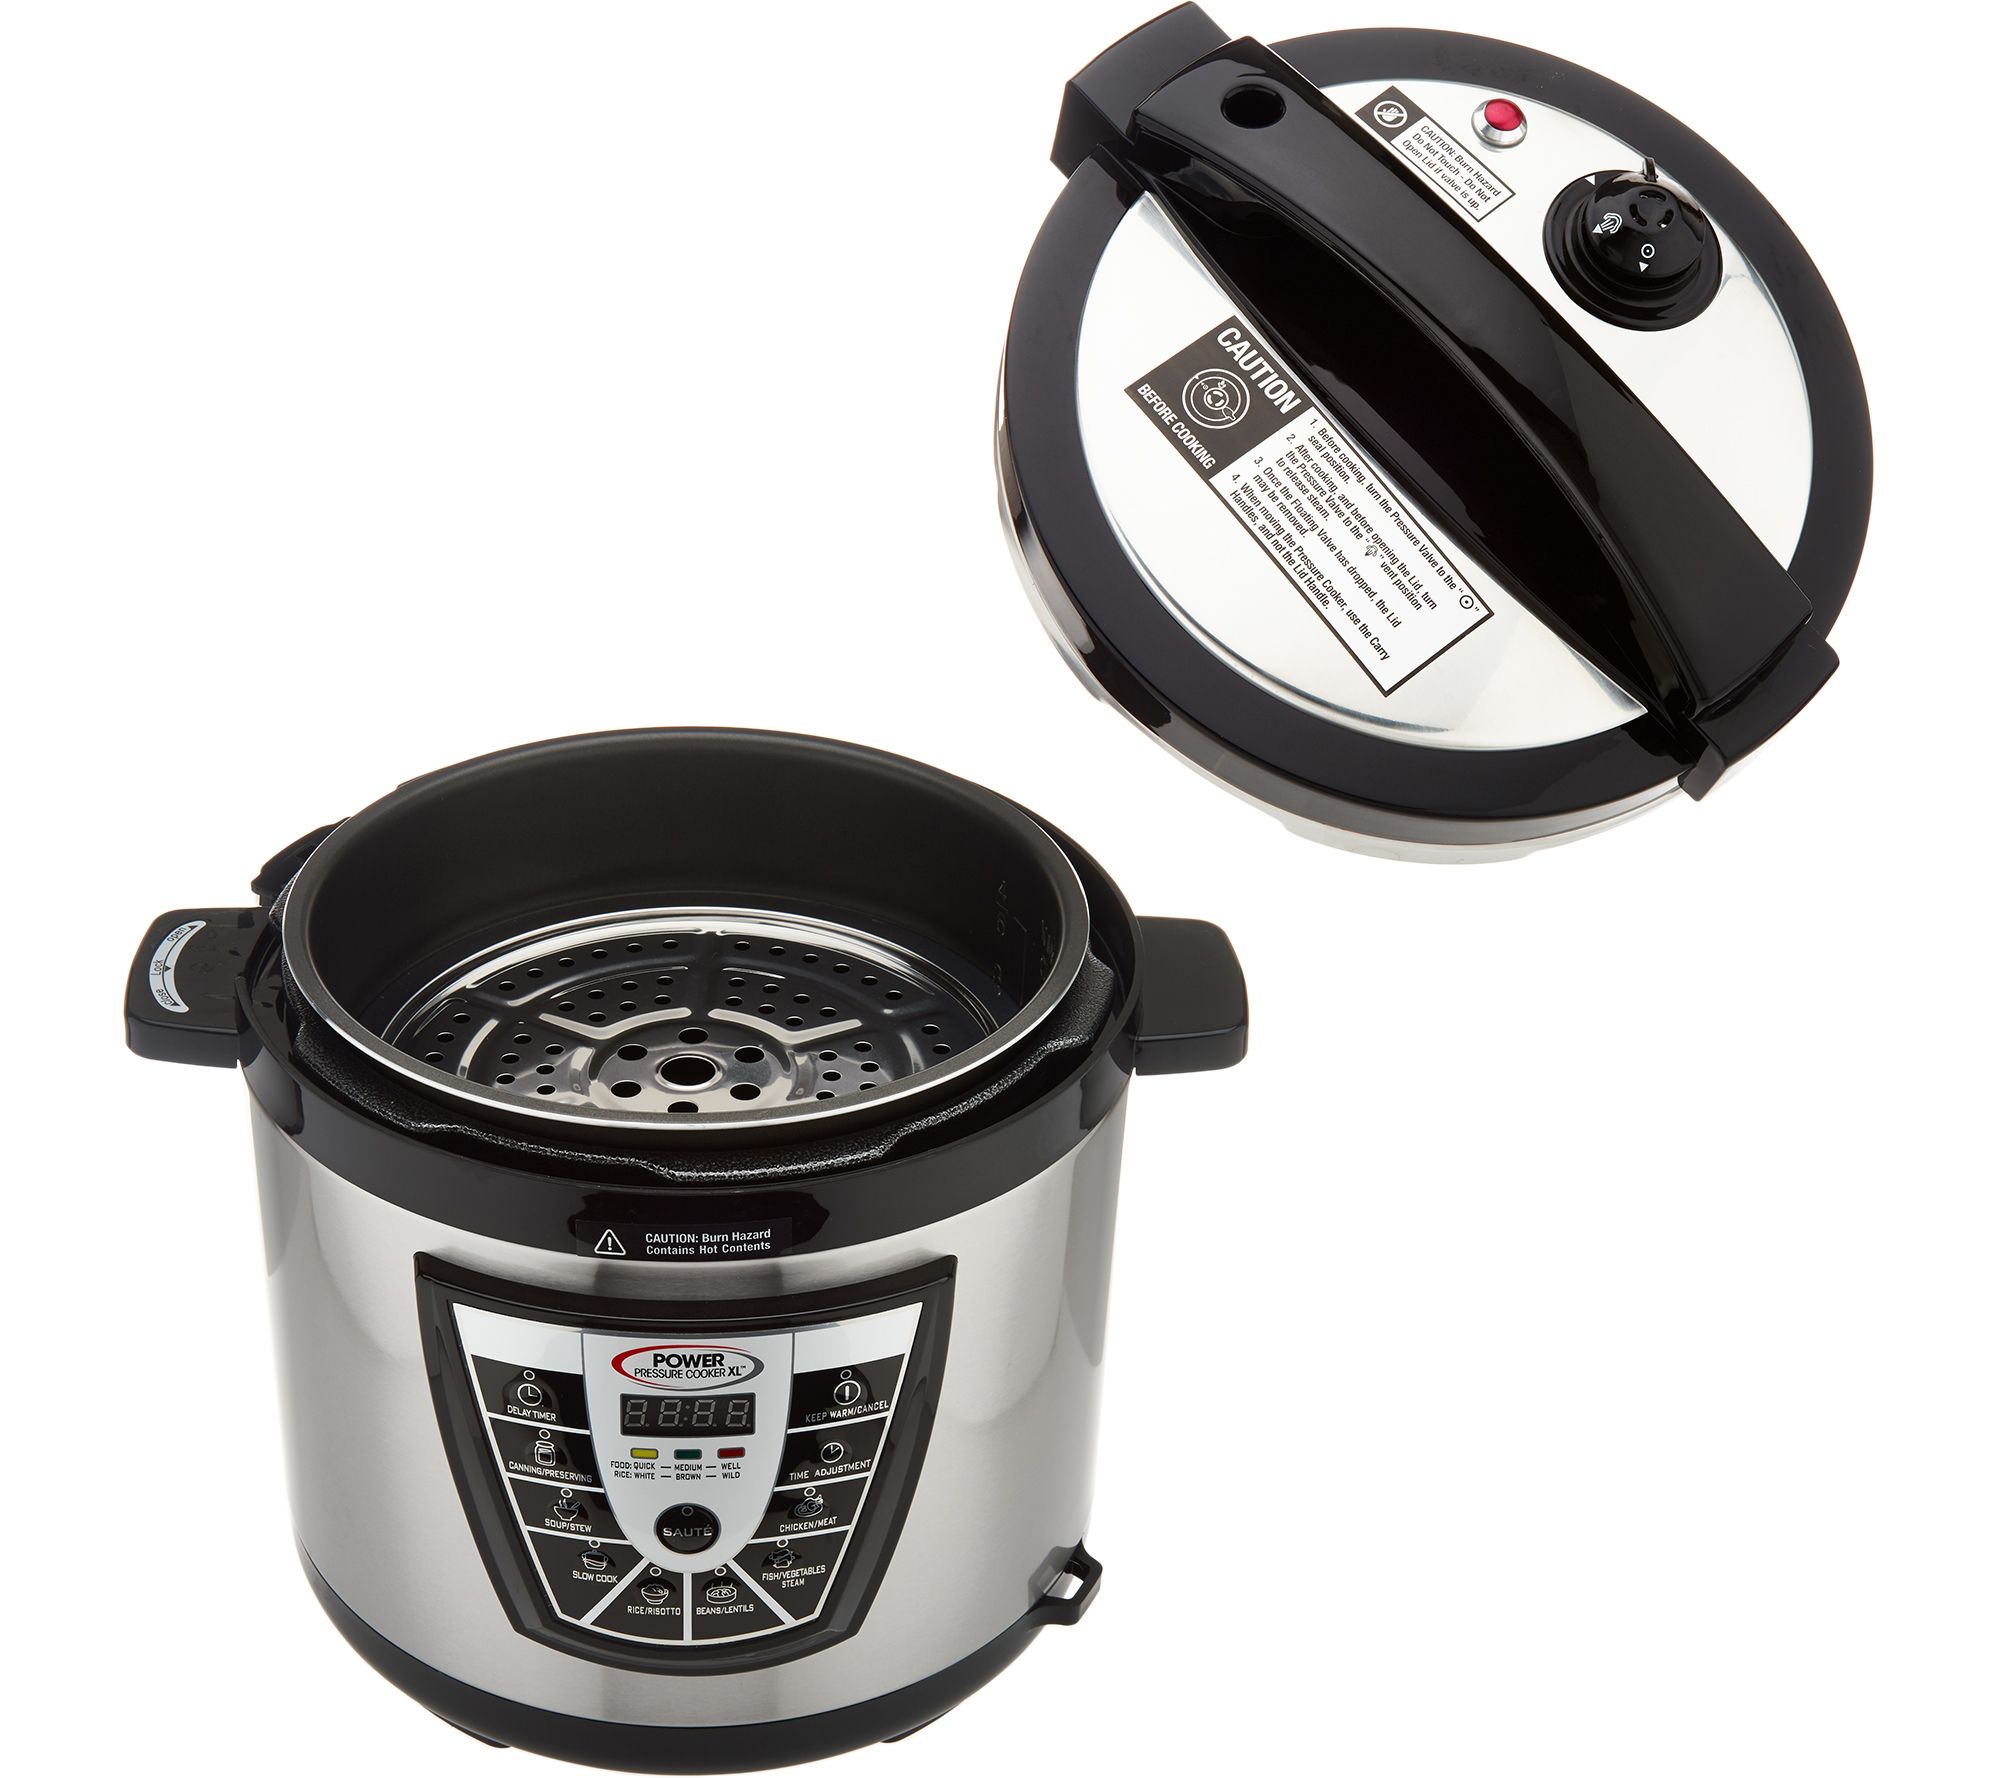 Power Pressure Cooker XL 8-qt Pressure Cooker with Recipes & Accessories